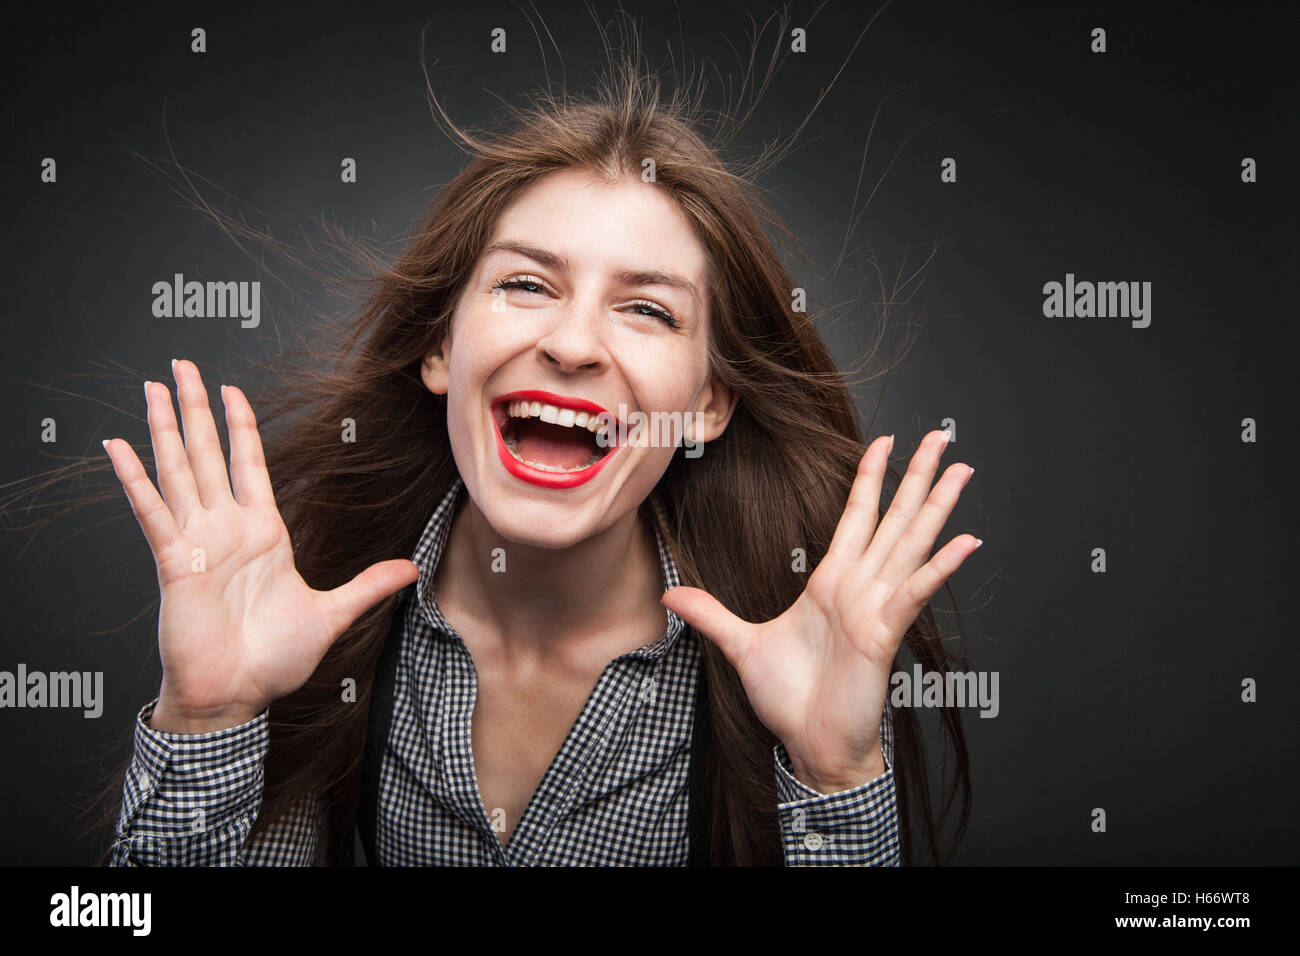 Beautiful women smiling with flying hair. Stock Photo